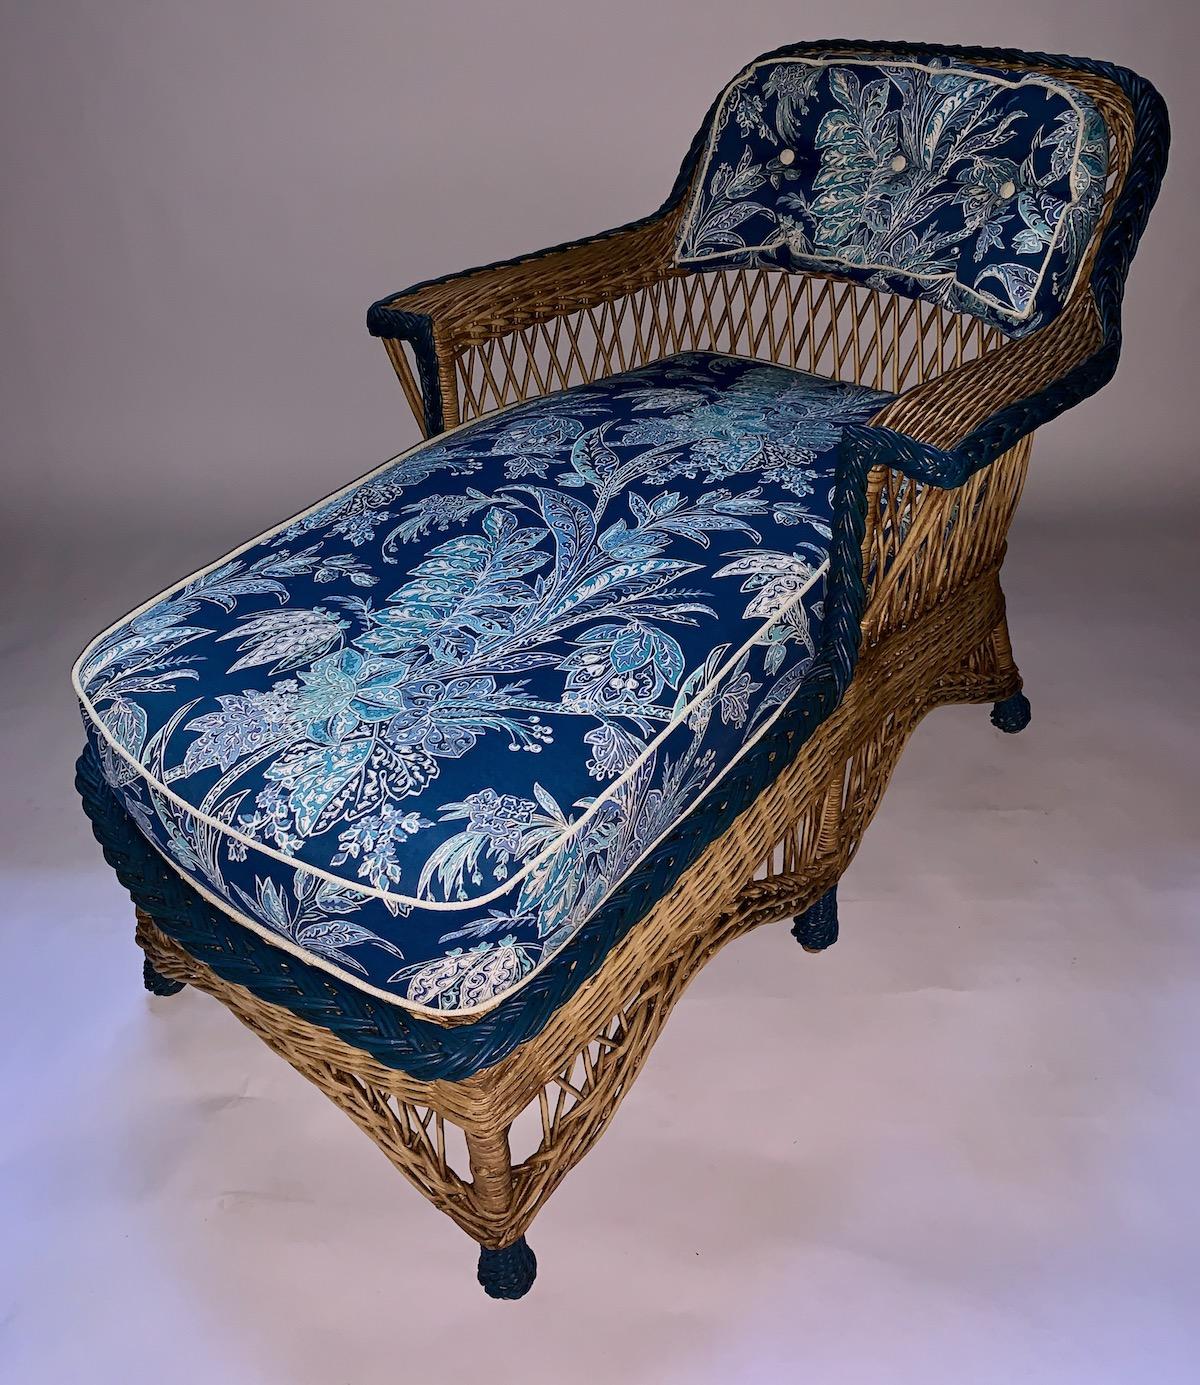 A beautiful reed and rattan wicker chaise lounge in a lovely natural color with a continuous navy blue braid trimming around the back, arms and seating, American, C. 1910 by the Heywood Wakefield Company of Gardner Ma. The perfect piece for your